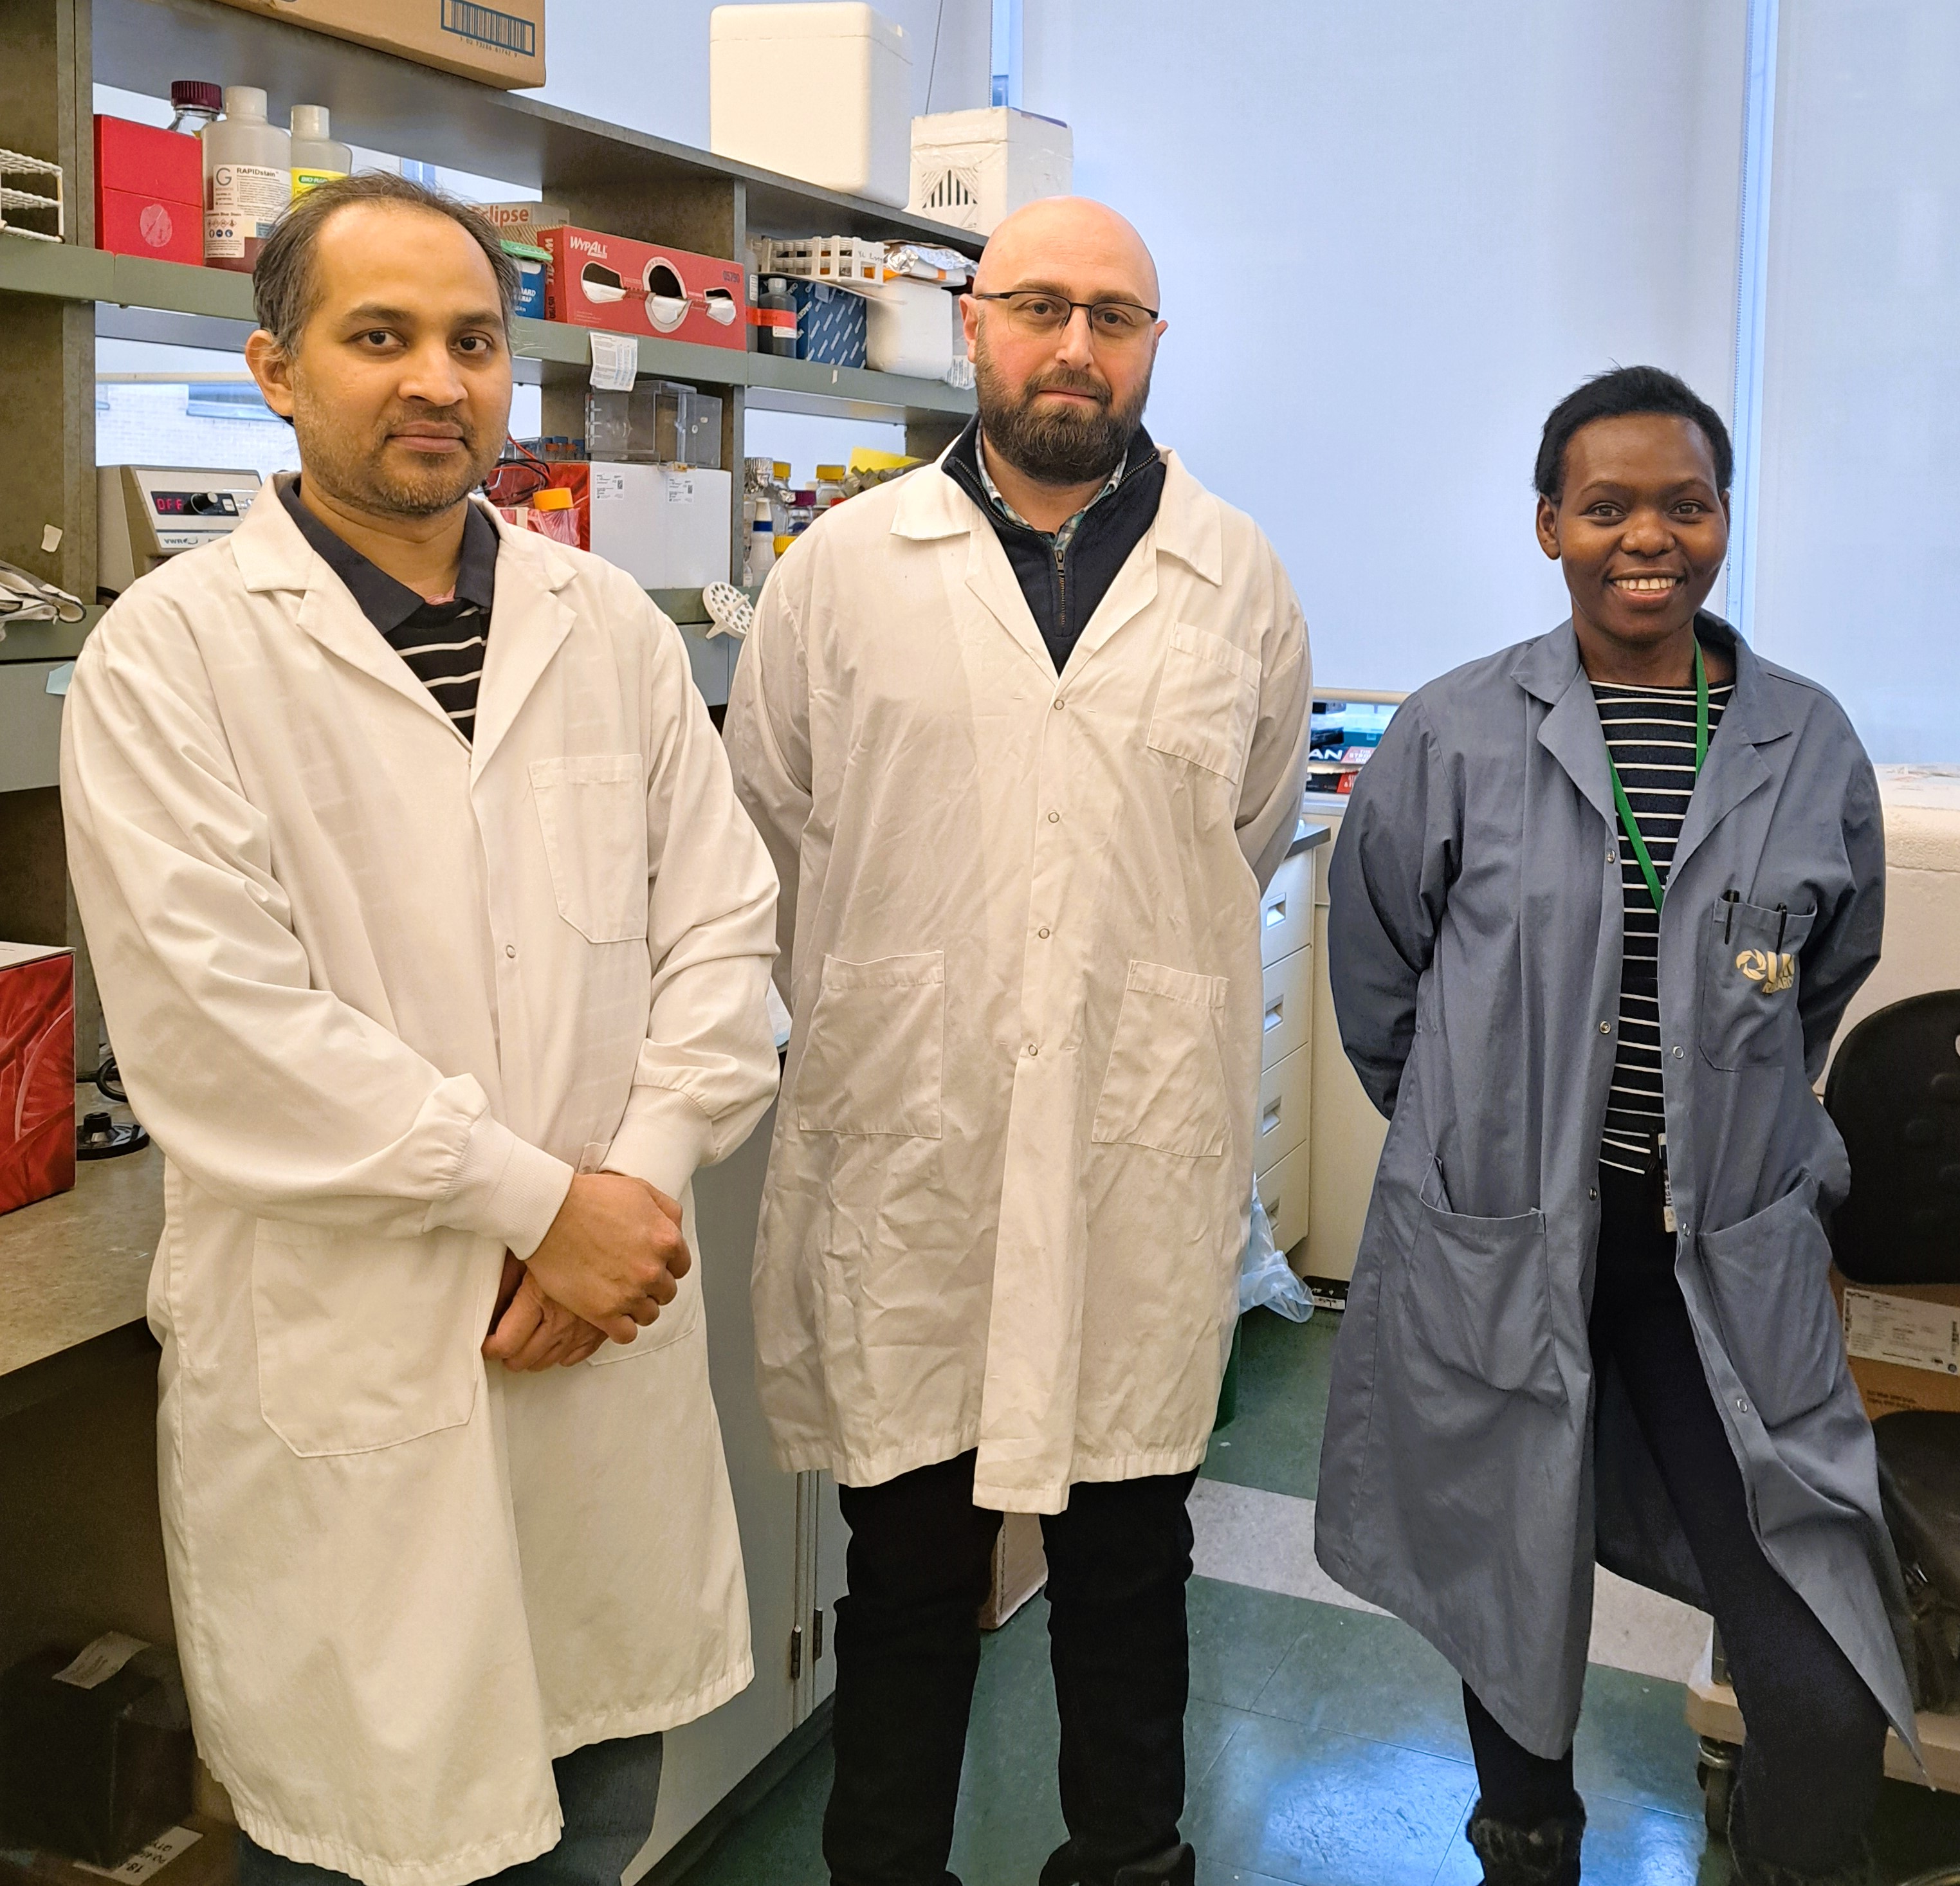 A group of scientists in lab coats